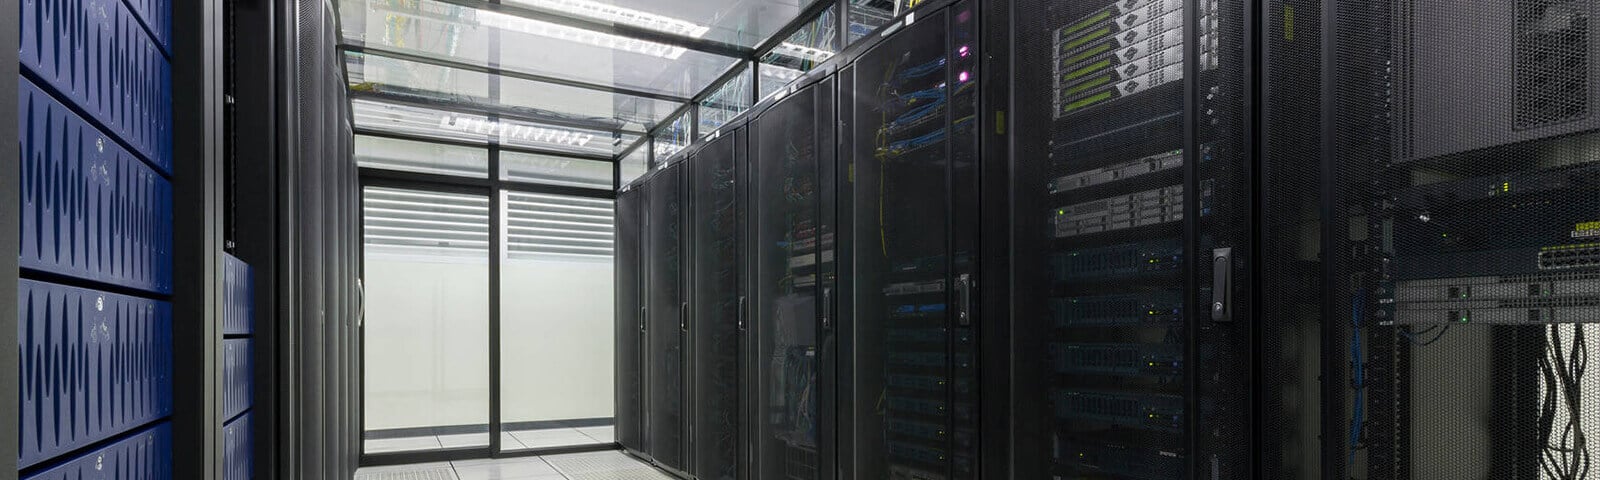 https://www.vertiv.com/4a17d9/globalassets/images/about-images/news-and-insights/articles/white-papers/data-center-transformation/1600x480-data-center-transformation_239456_0.jpg